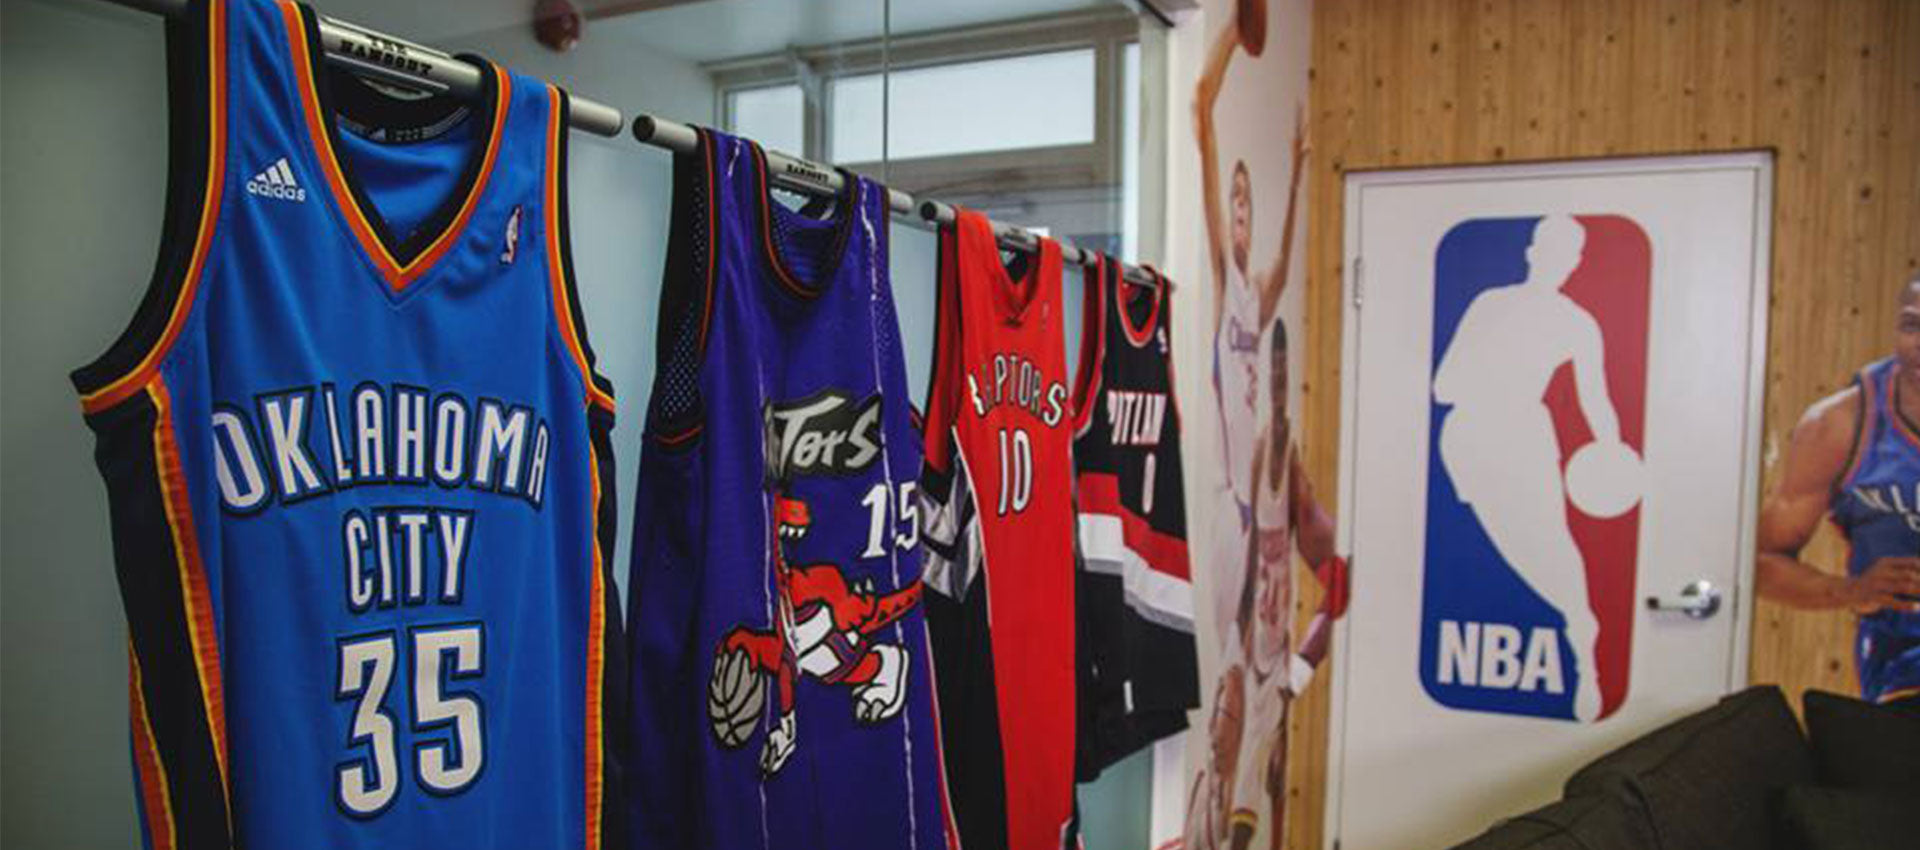 hanging sports jerseys on the wall